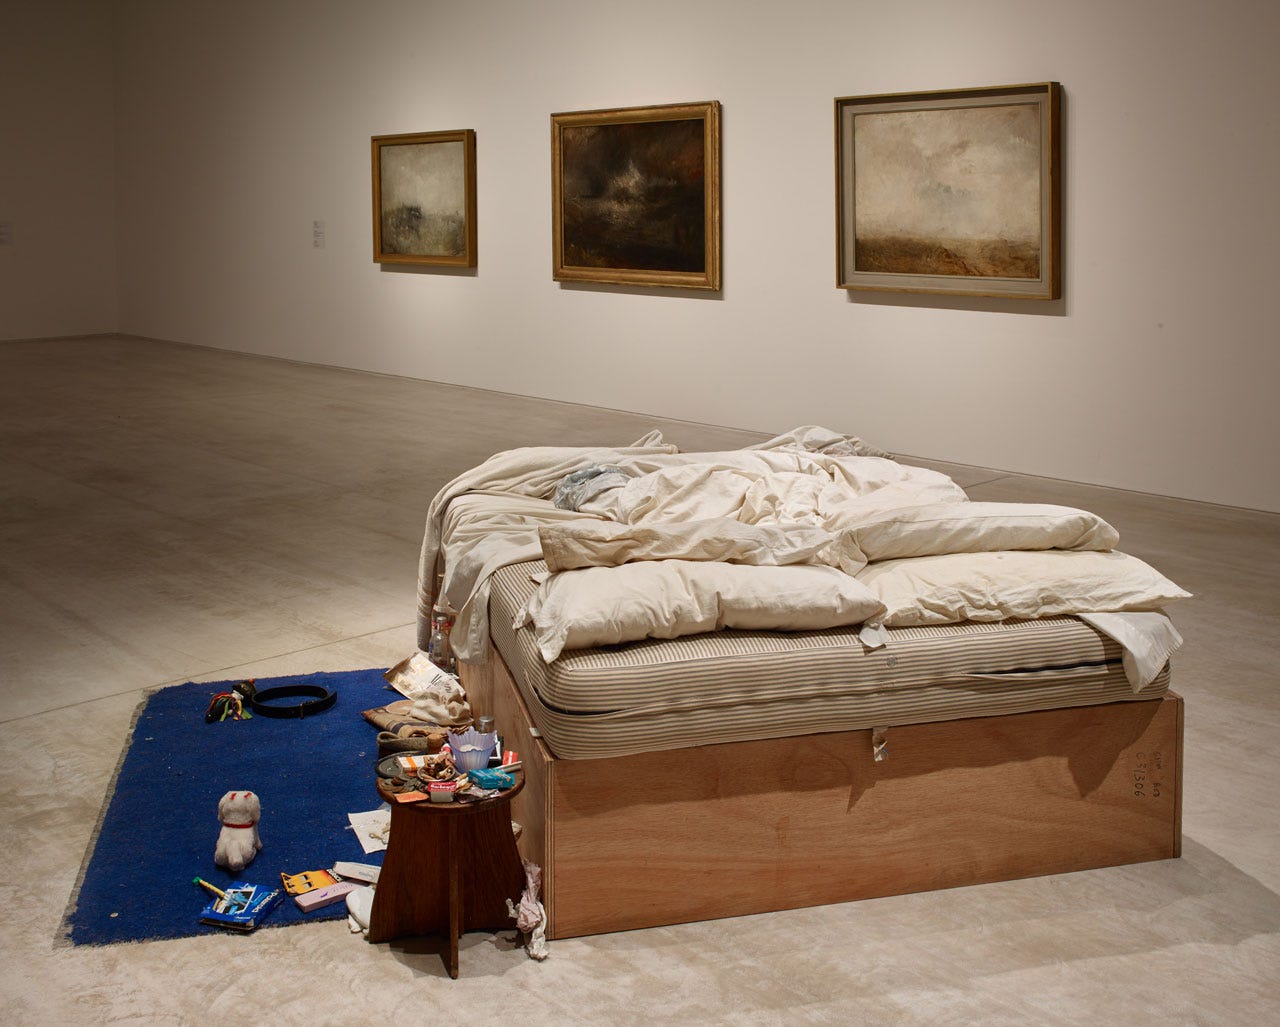 Tracey Emin S My Bed Revisiting A Work I Disliked By Jessica Medium